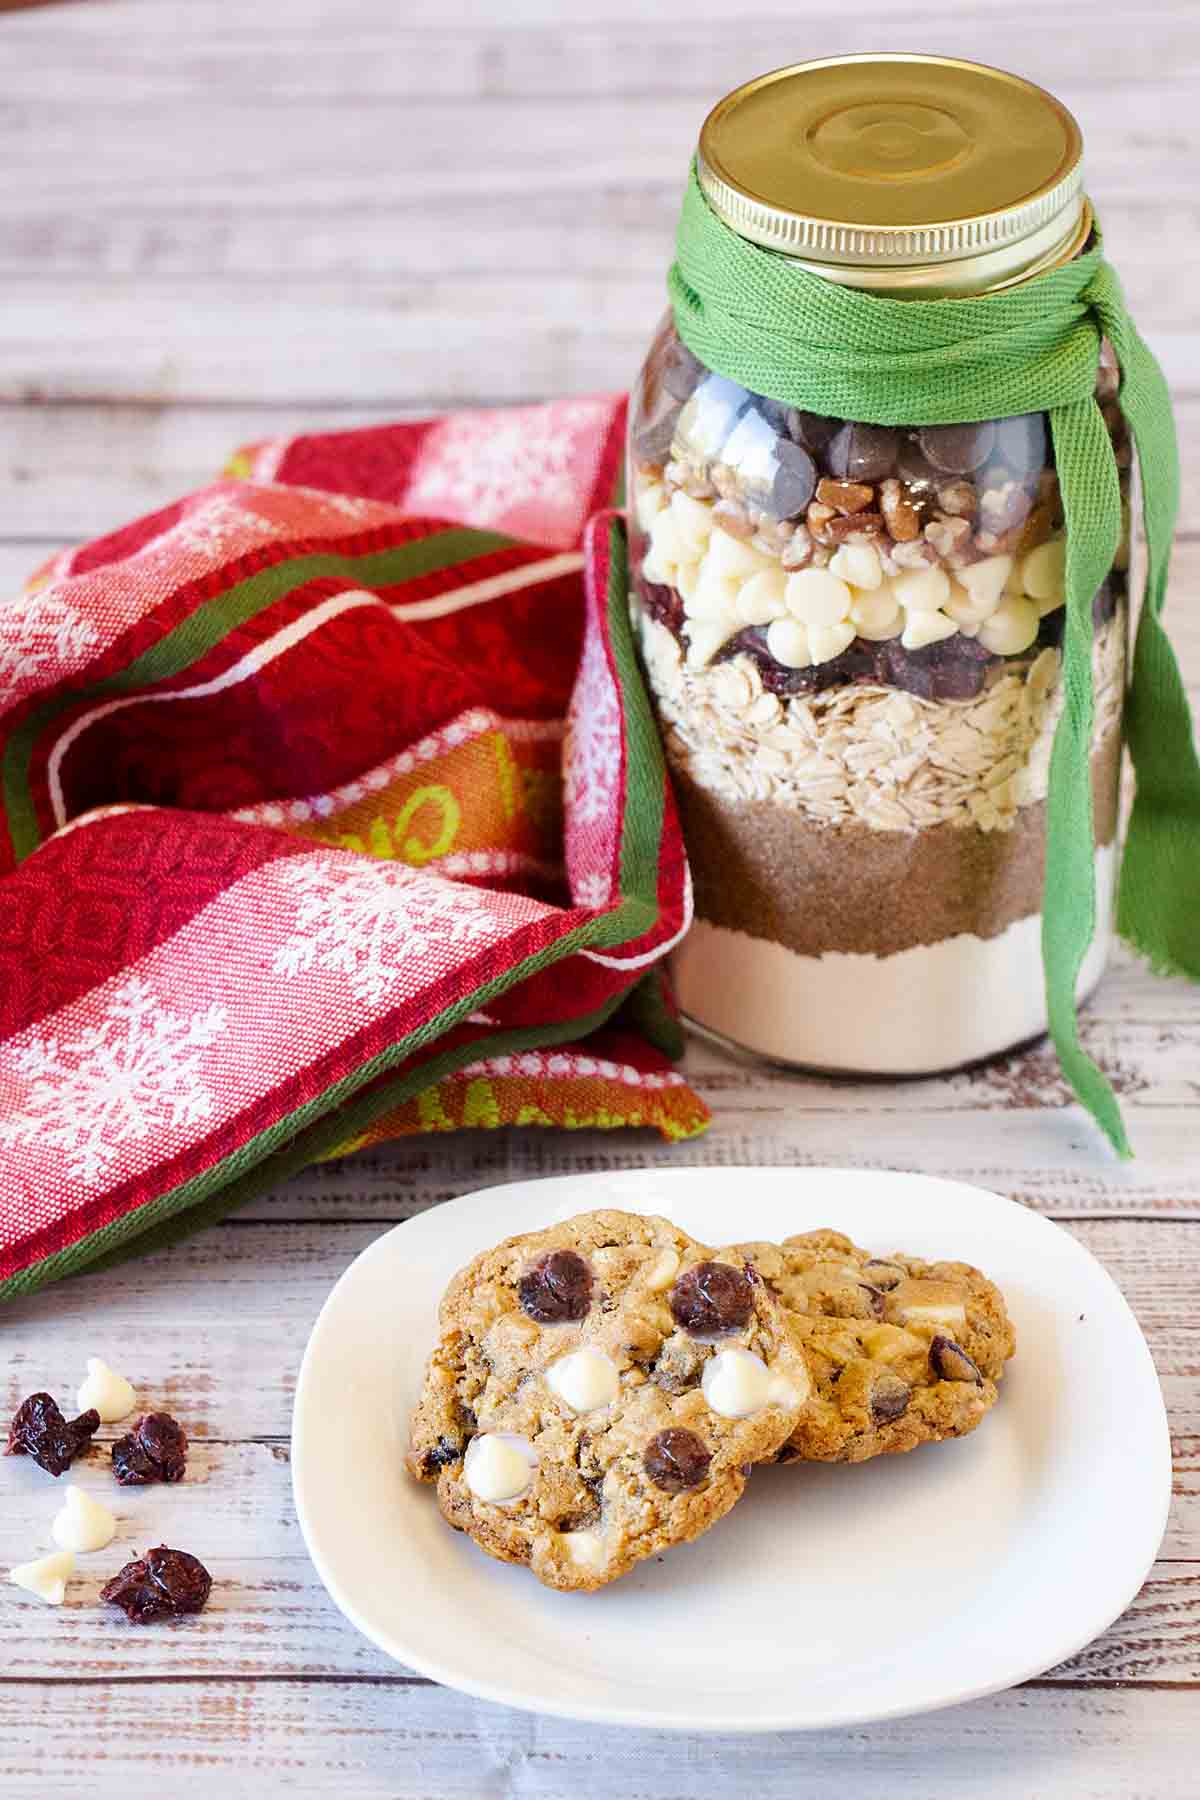 Cranberry White Chocolate Oatmeal Cookies In A Jar - Suburban